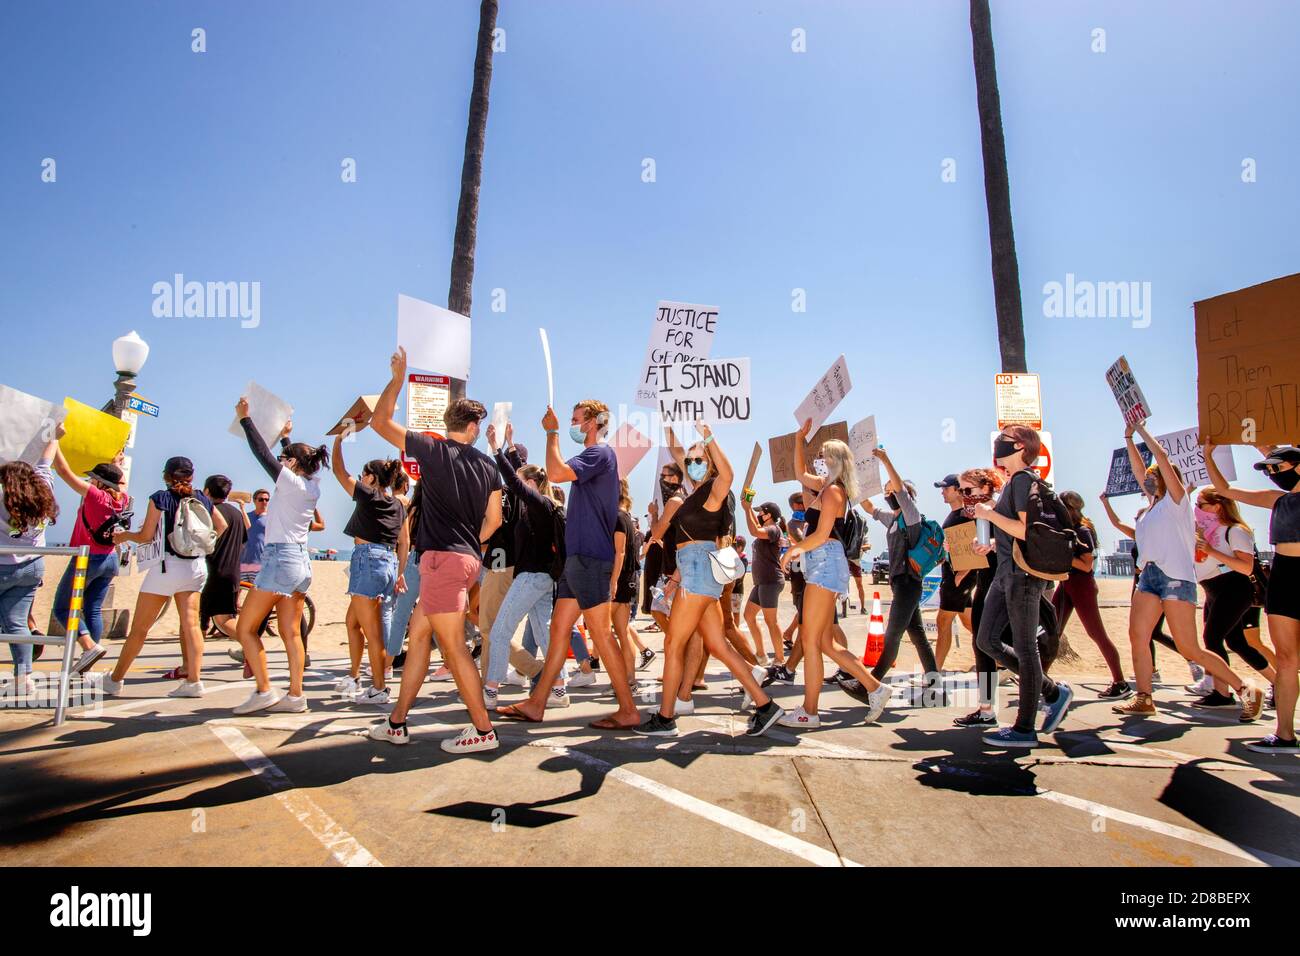 Wearing face masks due to coronavirus, a Black Lives Matter demonstration carries signs in Newport Beach, CA. Stock Photo